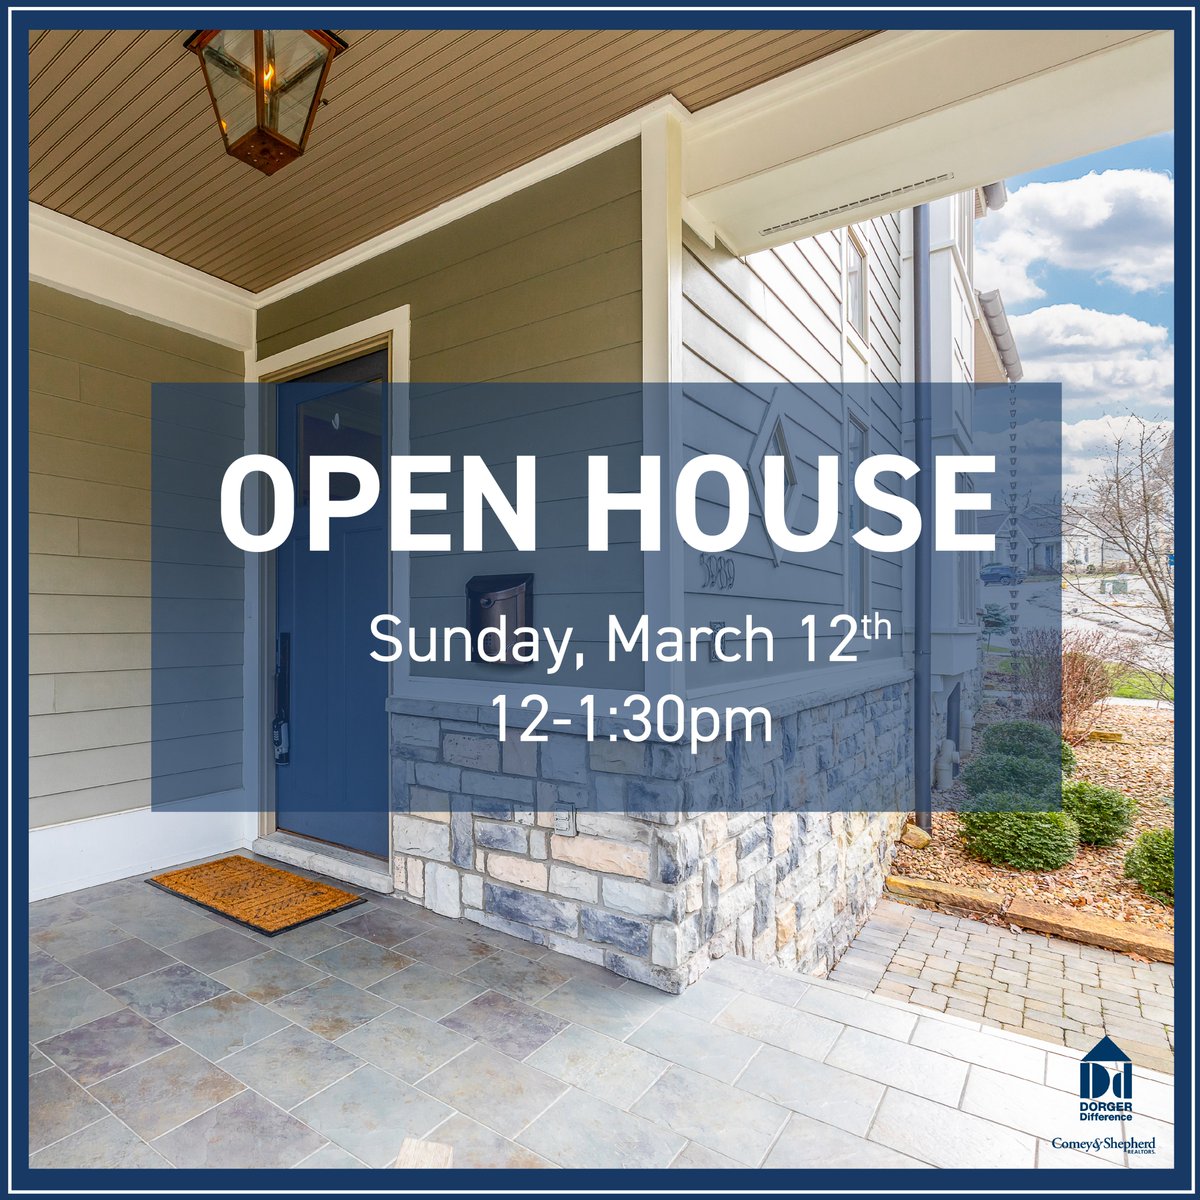 OPEN HOUSE THIS SUNDAY!
🔹Open floor plan
🔹Elevator access to all floors 
🔹1st floor owner's suite
🔹Gourmet kitchen
🔹Tax abated through 2024

comey.com/real-estate/ci…

#openhouse #home #house #cincinnatirealesate #cincyrealestate #realestate #cincinnati #realtor